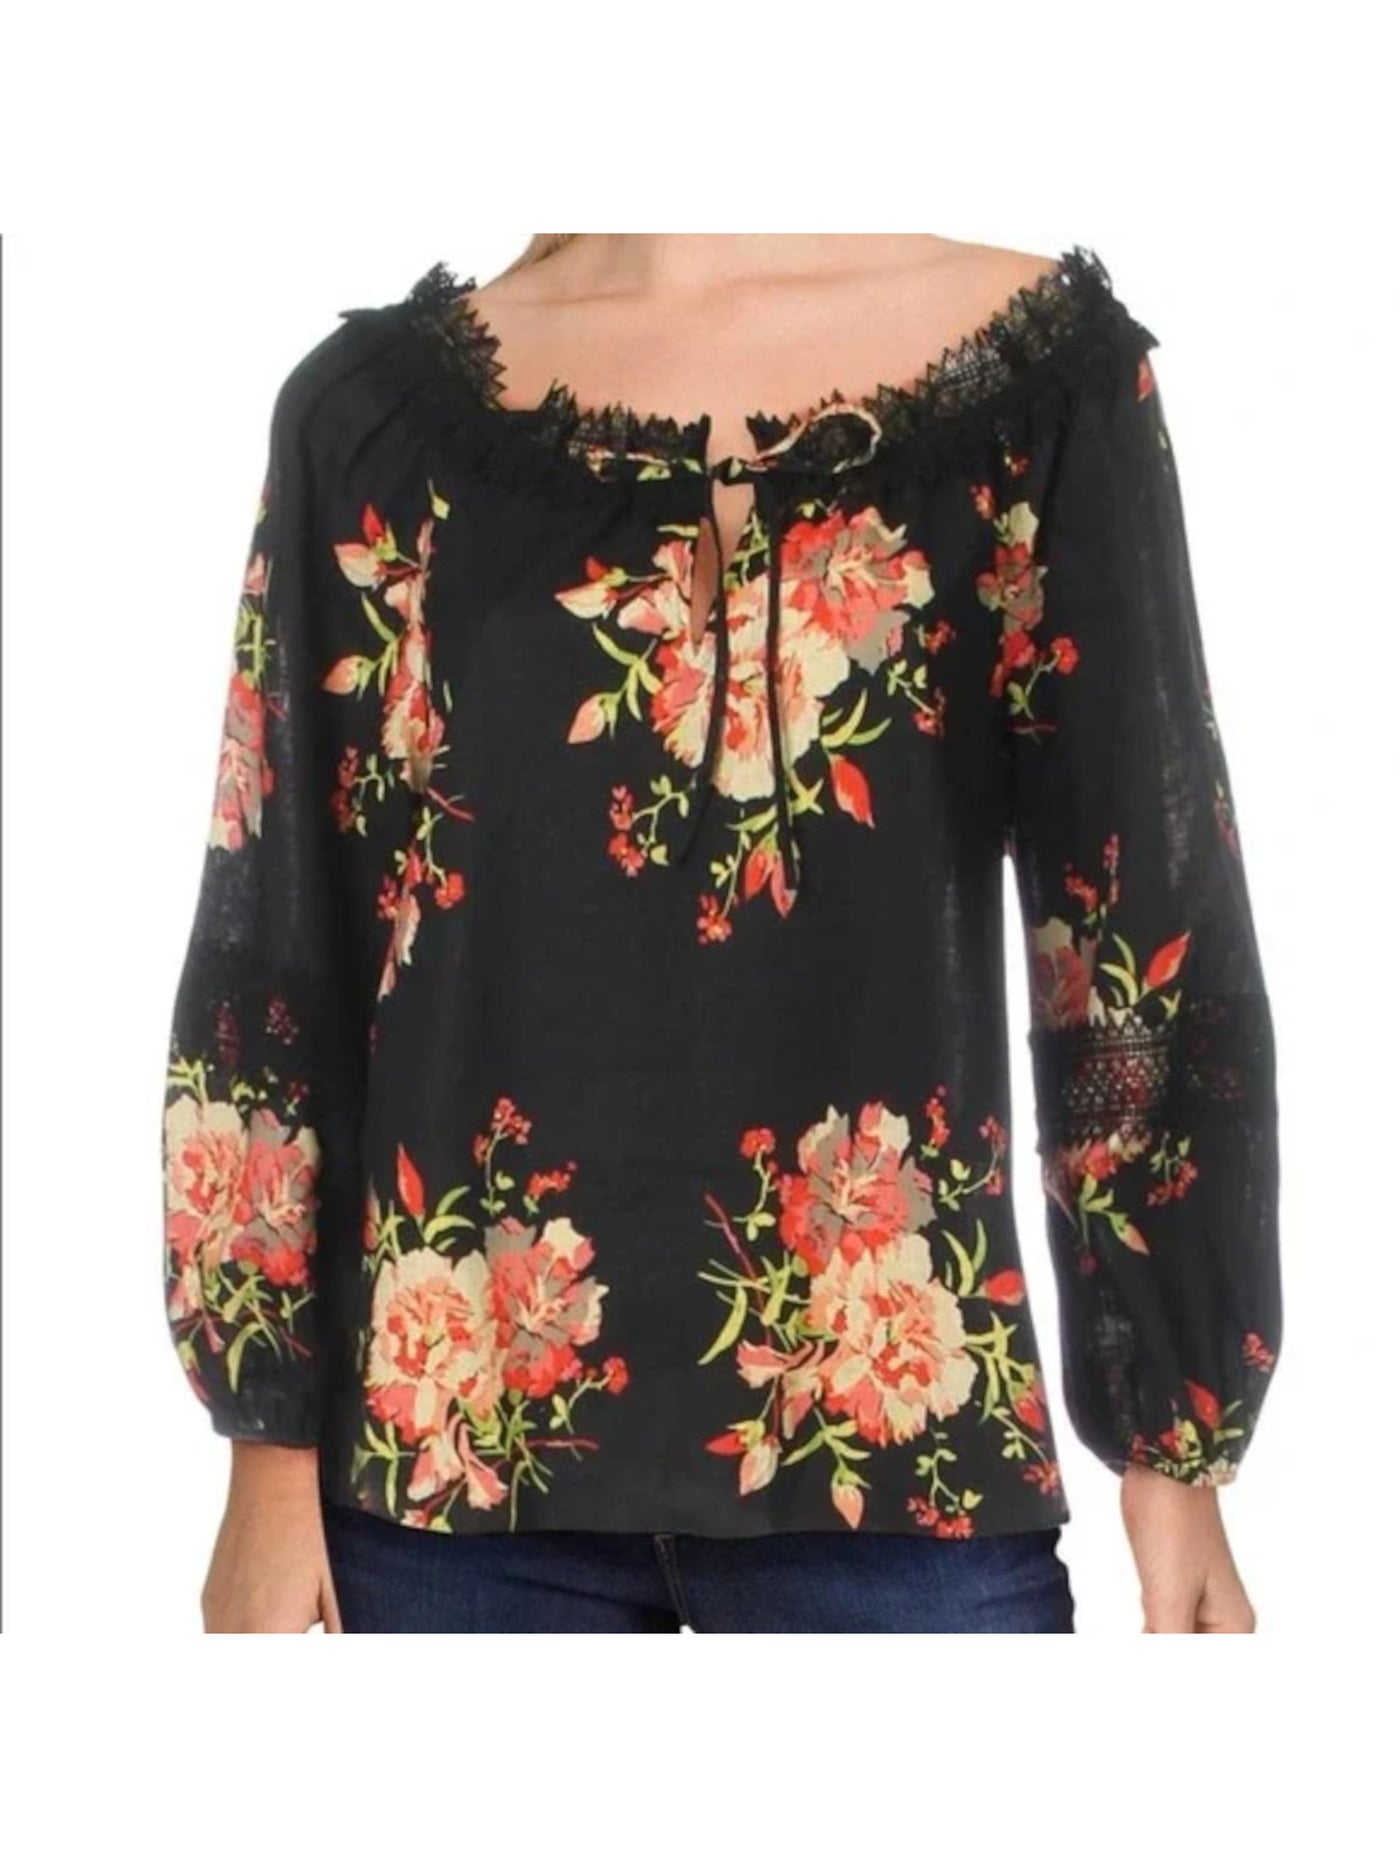 LE GALI Womens Black Textured Sheer Lace Trim Pullover Unlined Floral Long Sleeve Tie Neck Top XS